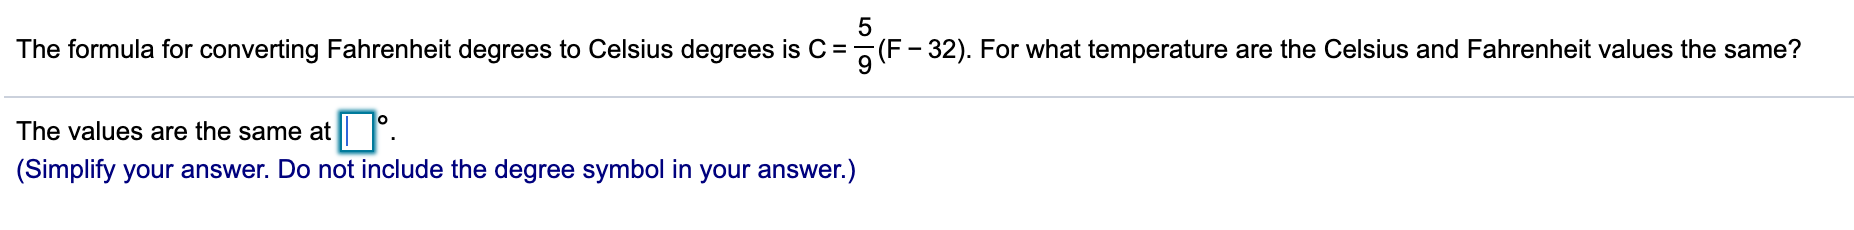 The formula for converting Fahrenheit degrees to Celsius degrees is C= (F- 32). For what temperature are the Celsius and Fahrenheit values the same?
